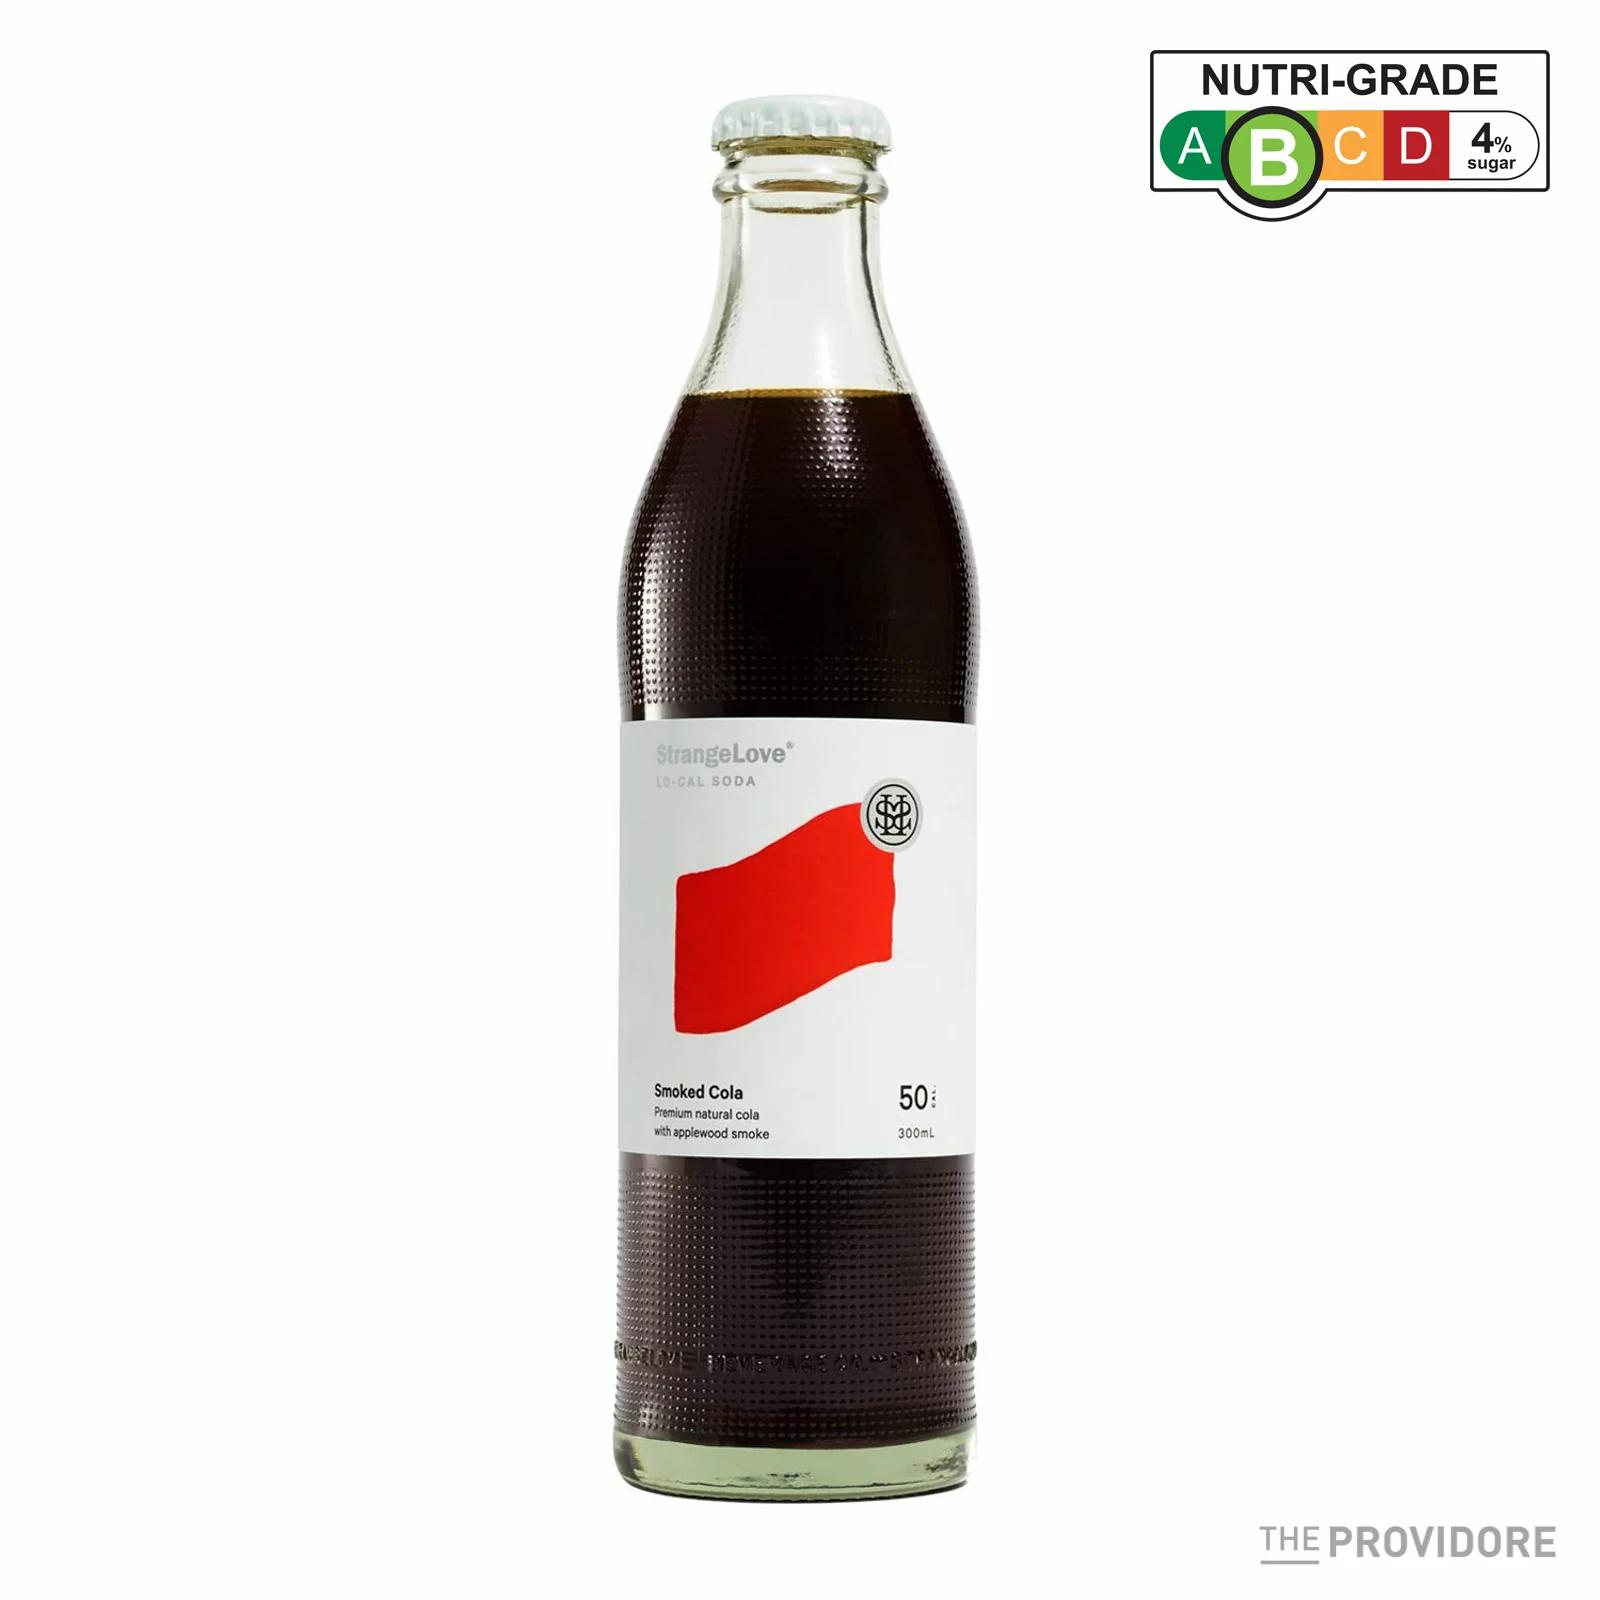 strangelove smoked cola - What are the ingredients in StrangeLove Cola